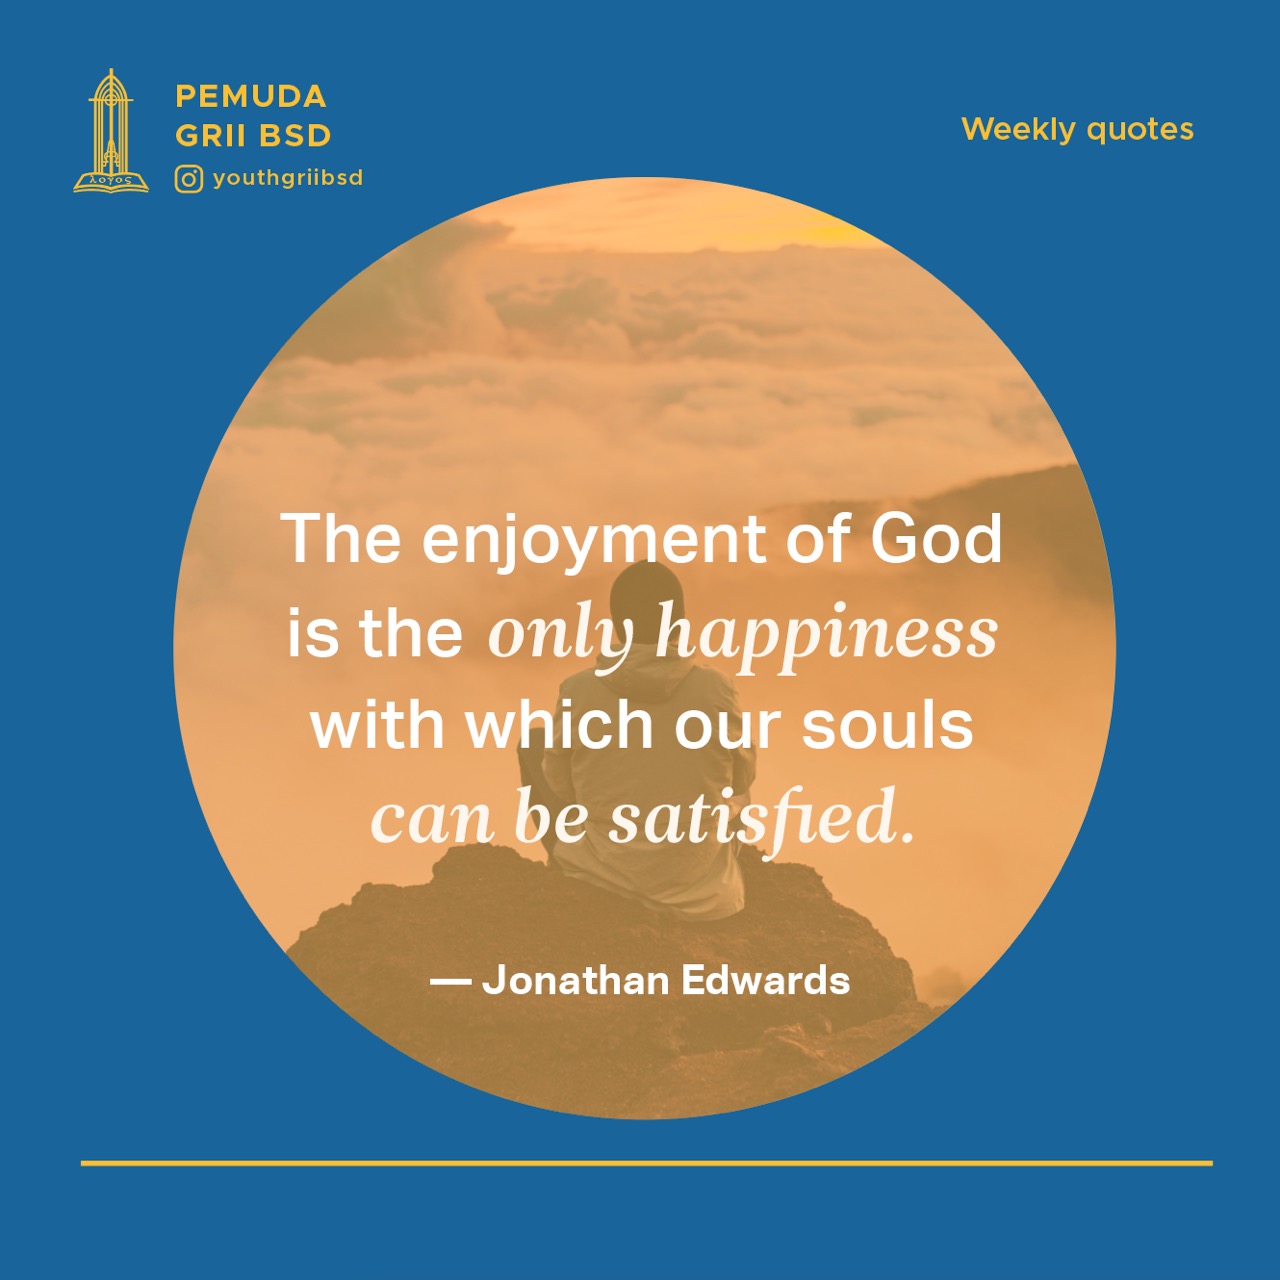 The enjoyment of God is the only happiness with which our souls can be satisfied.